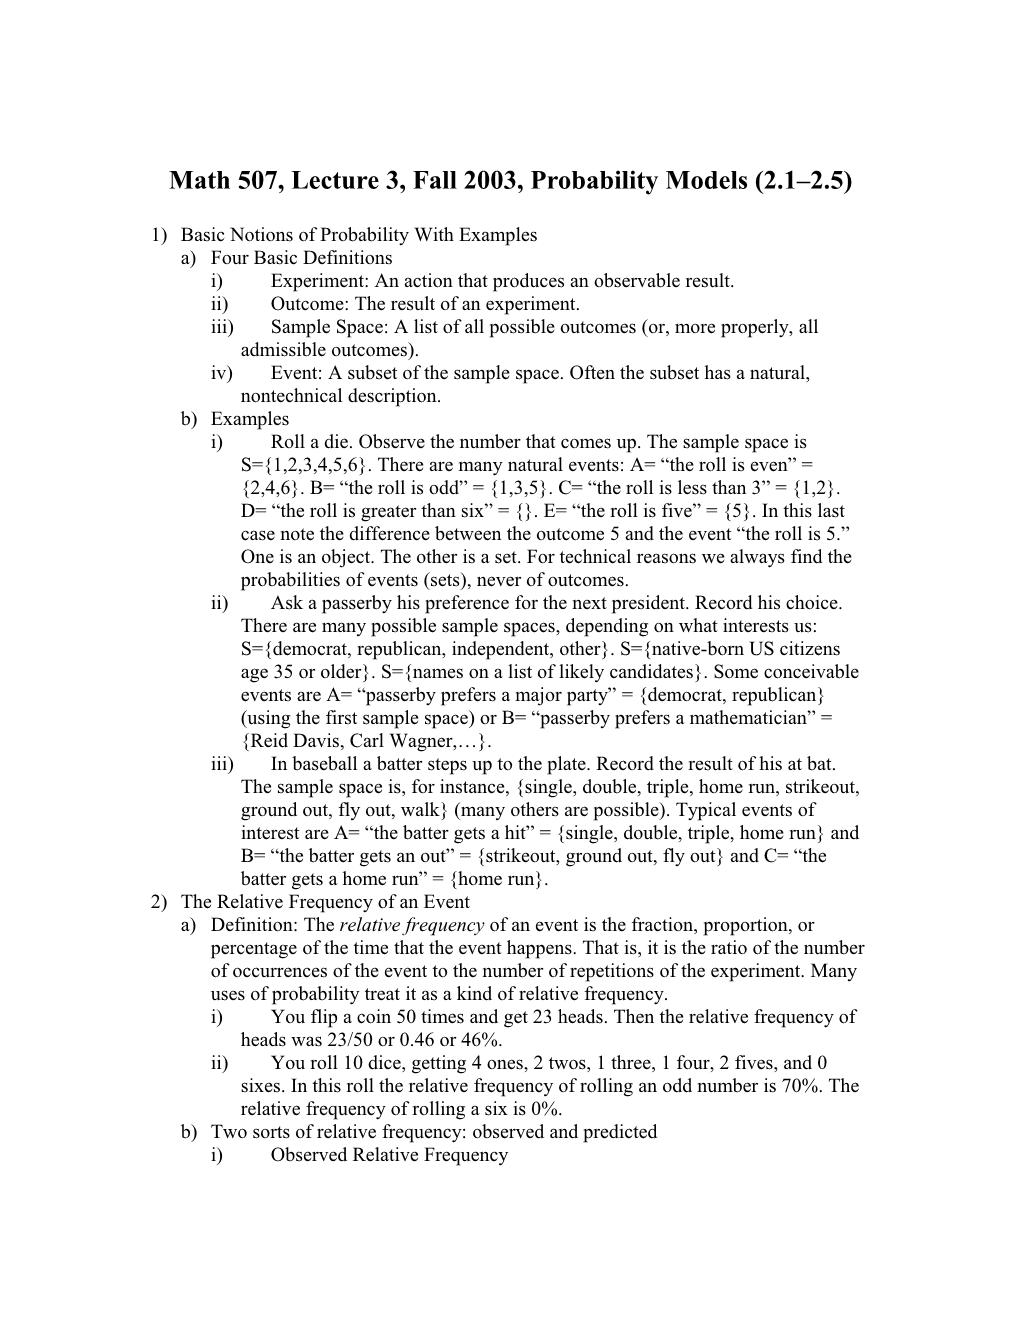 Math 507, Lecture 3, Fall 2003, Probability Models (2.1 2.5)